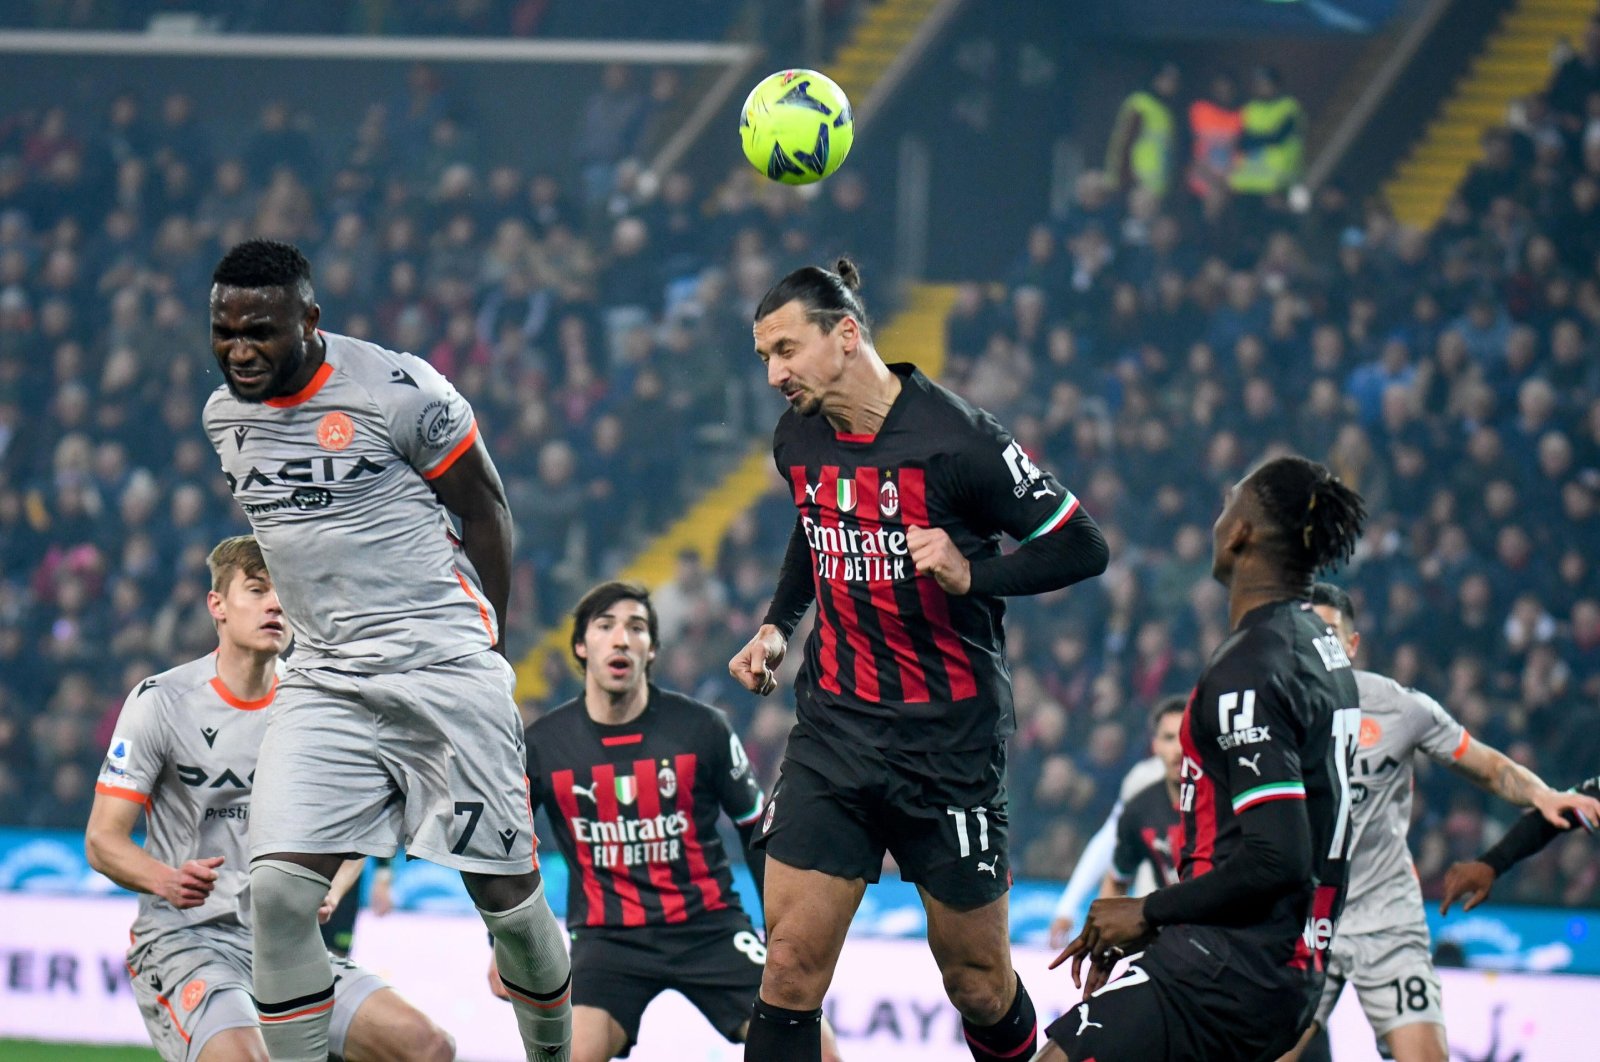 AC Milan&#039;s Zlatan Ibrahimovic heads the ball during the Italy&#039;s Serie A match against Udinese Calcio, Udine, Italy, March 18, 2023. (EPA Photo)